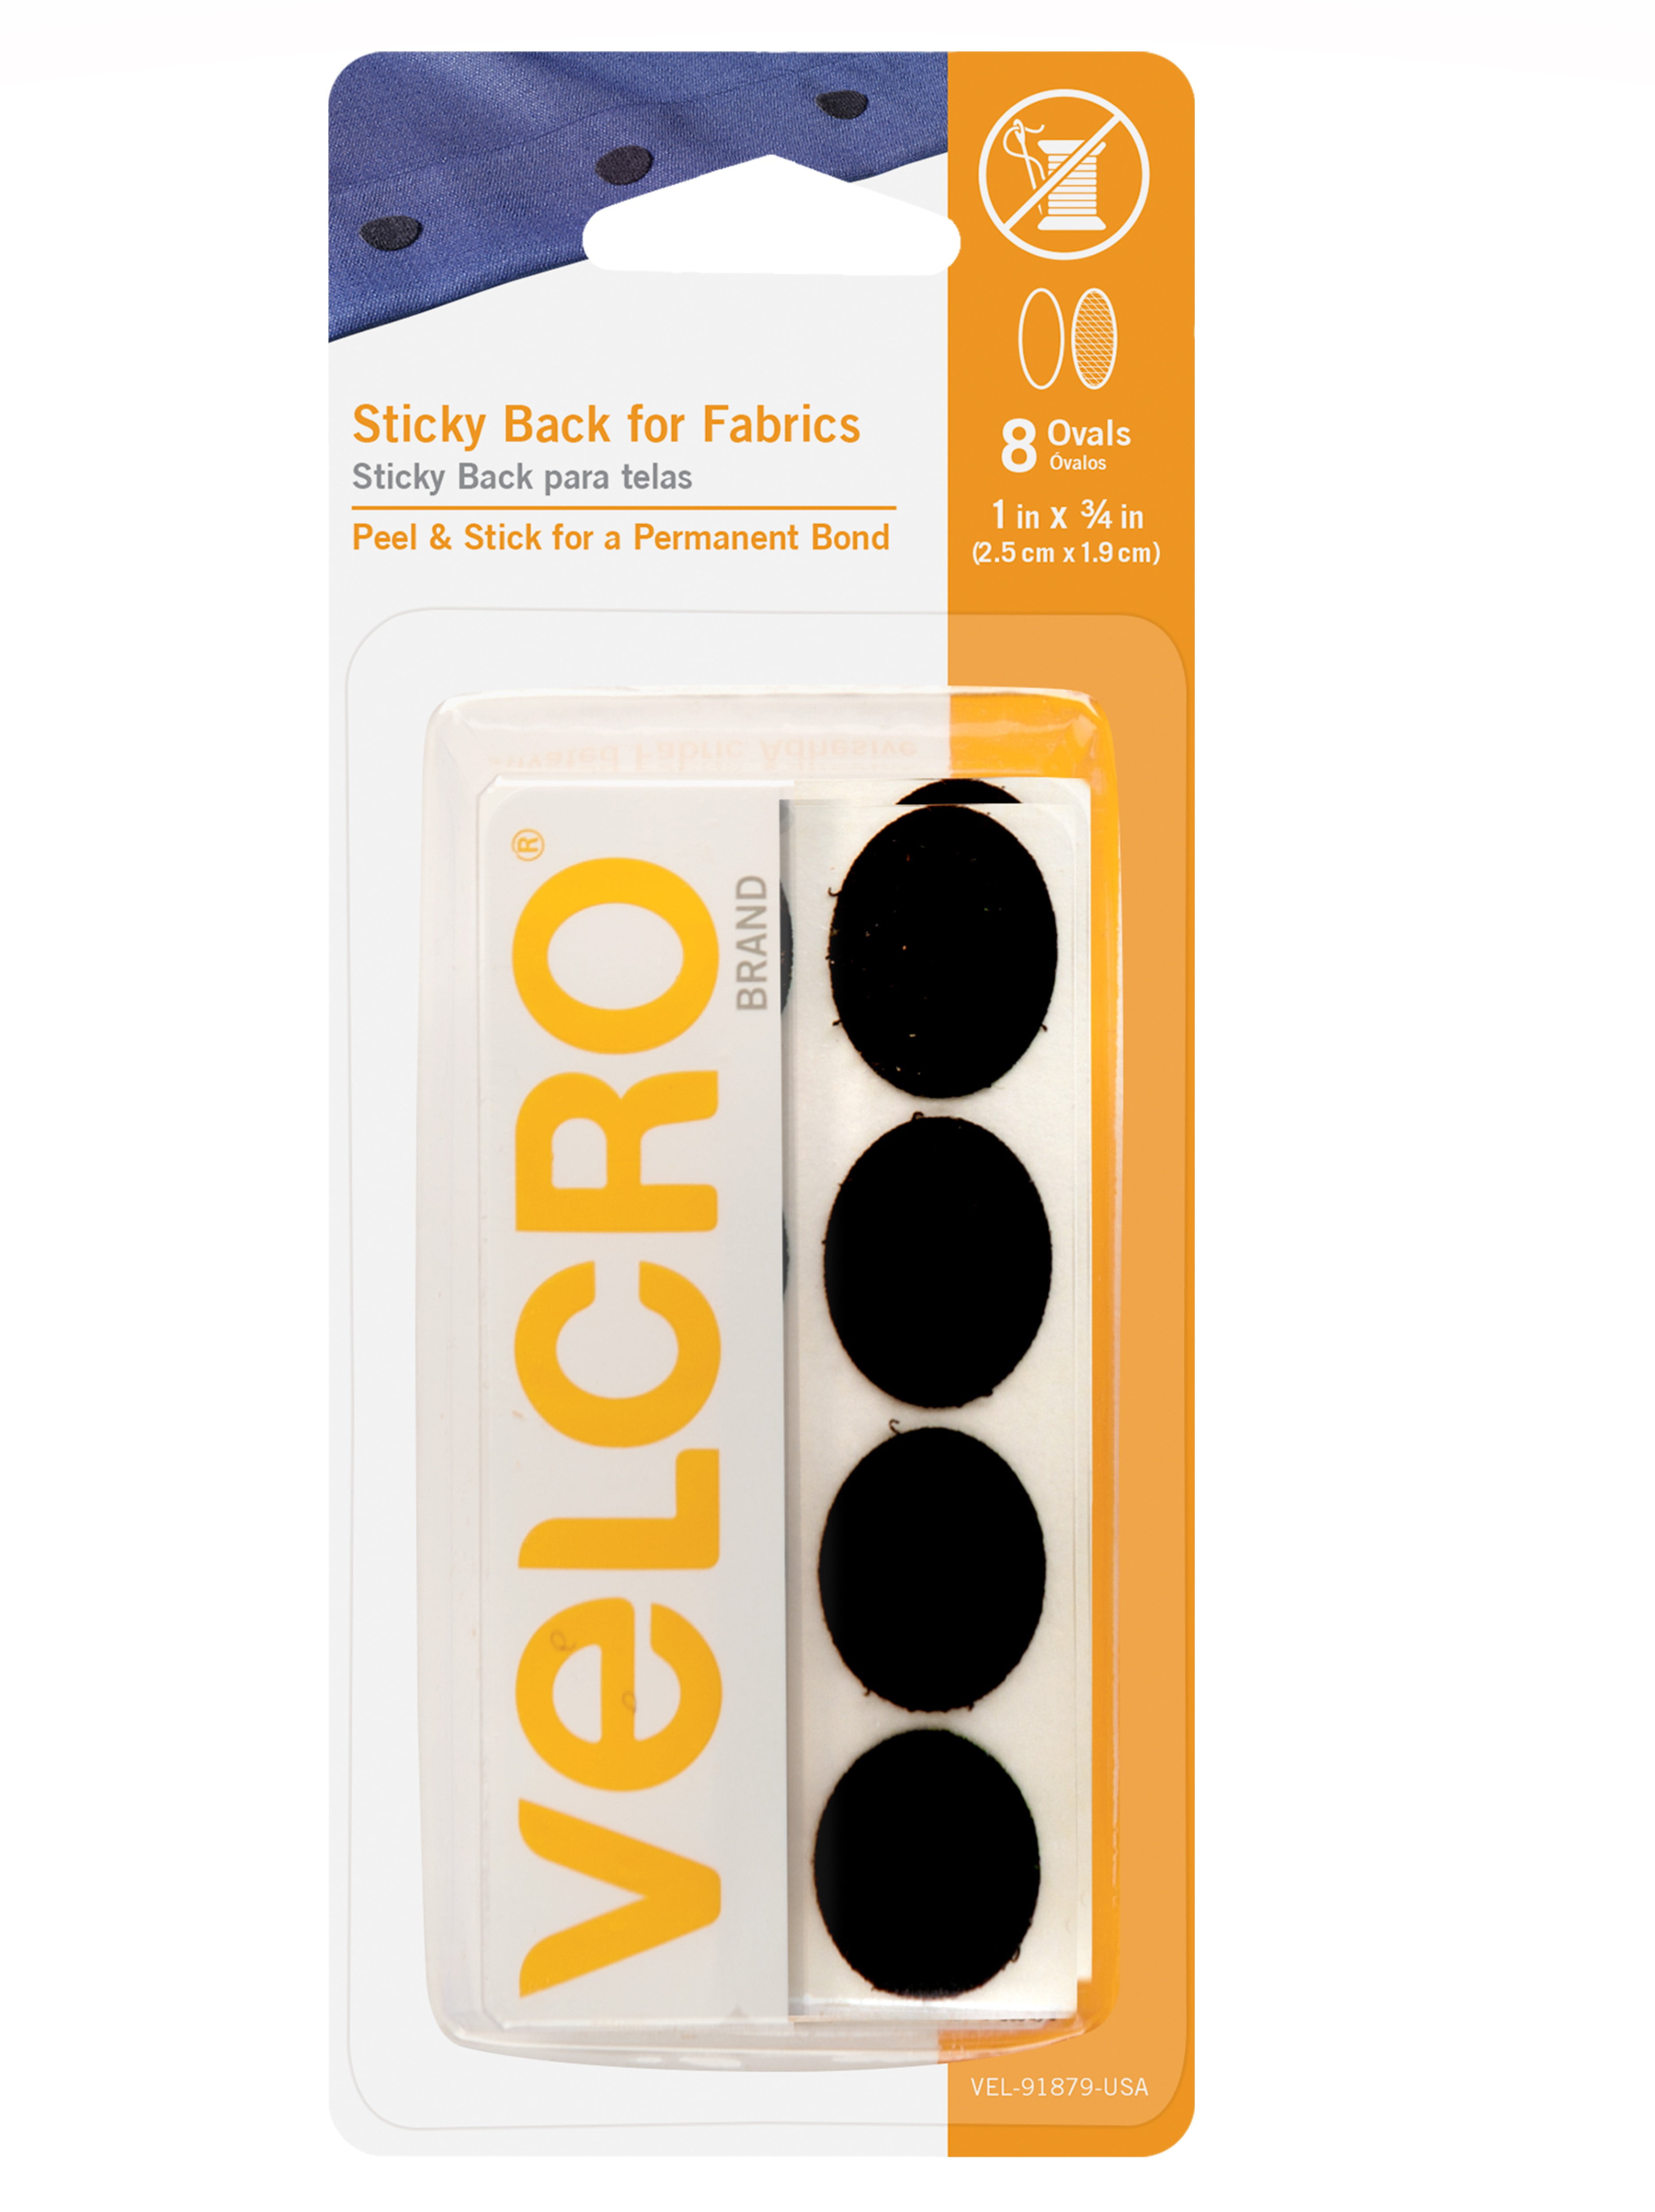 VELCRO Brand 0365477 Sew On Snag-Free Tape for Alterations and Hemming | No  Ironing or Gluing | Light Duty One-Piece Fabric Fastener | Cut-to-Length